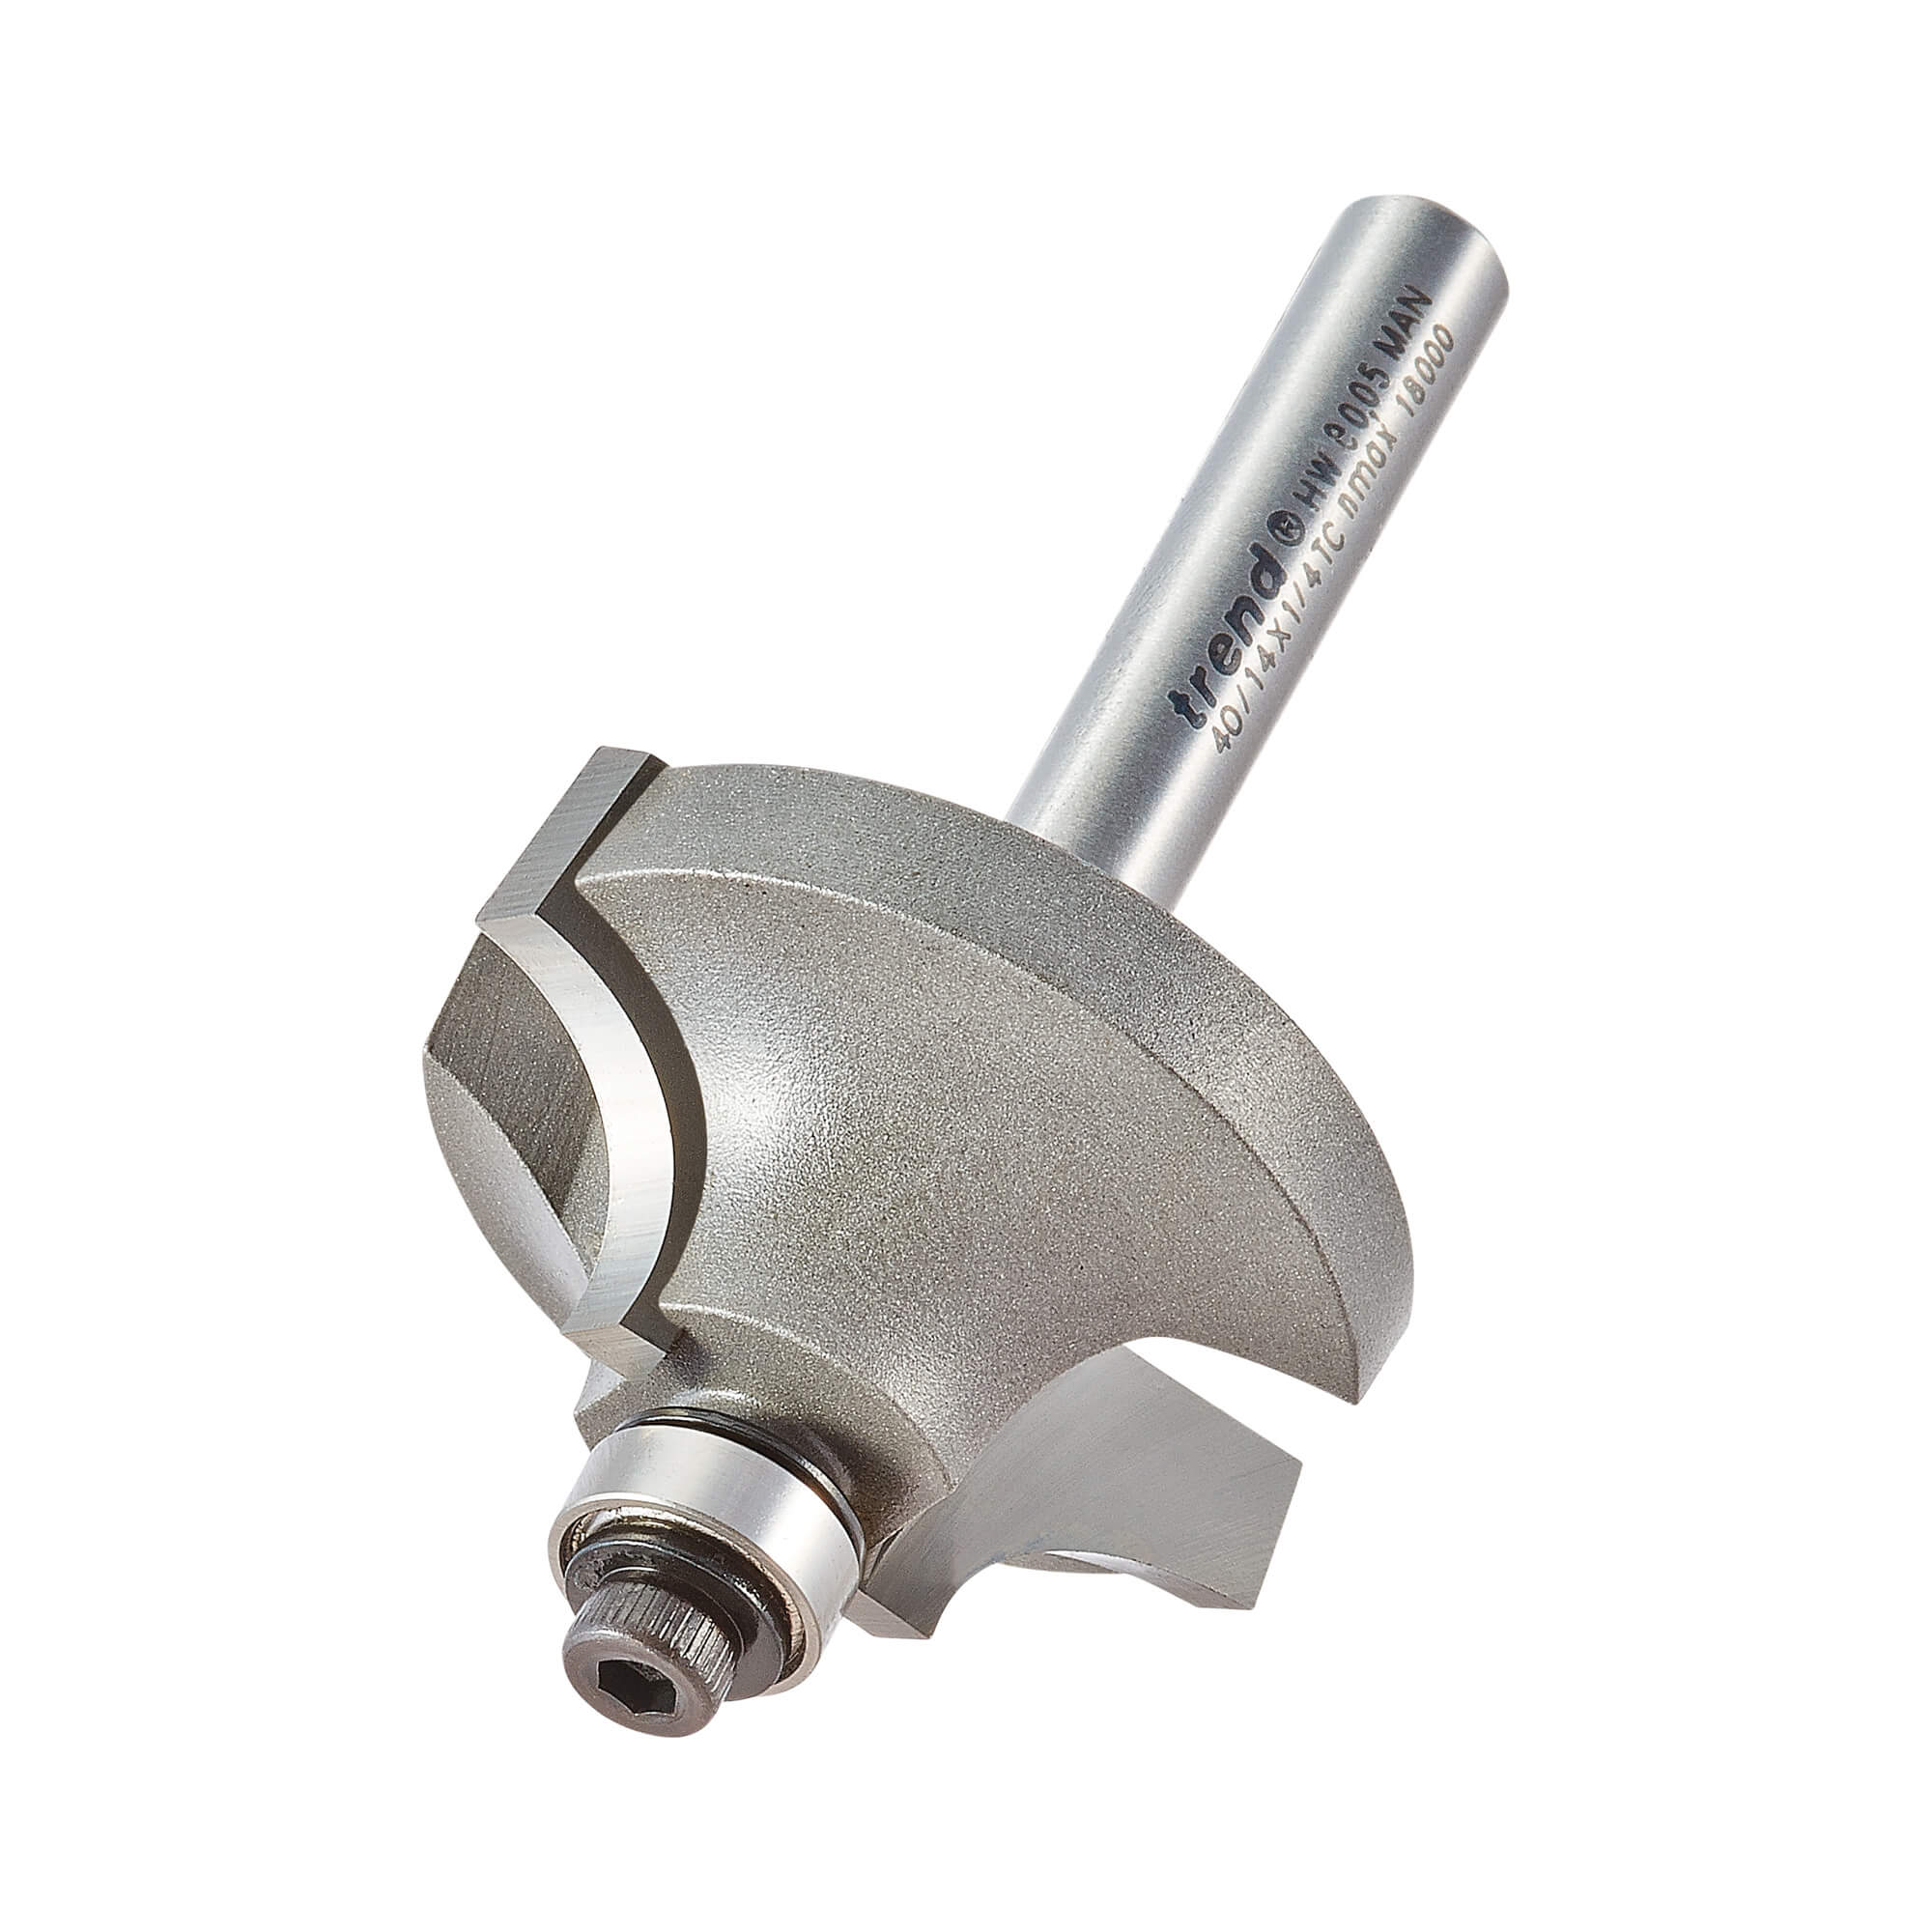 Image of Trend Large Step Ovolo Rounding Over Bearing Guided Router Cutter 35mm 16mm 1/4"